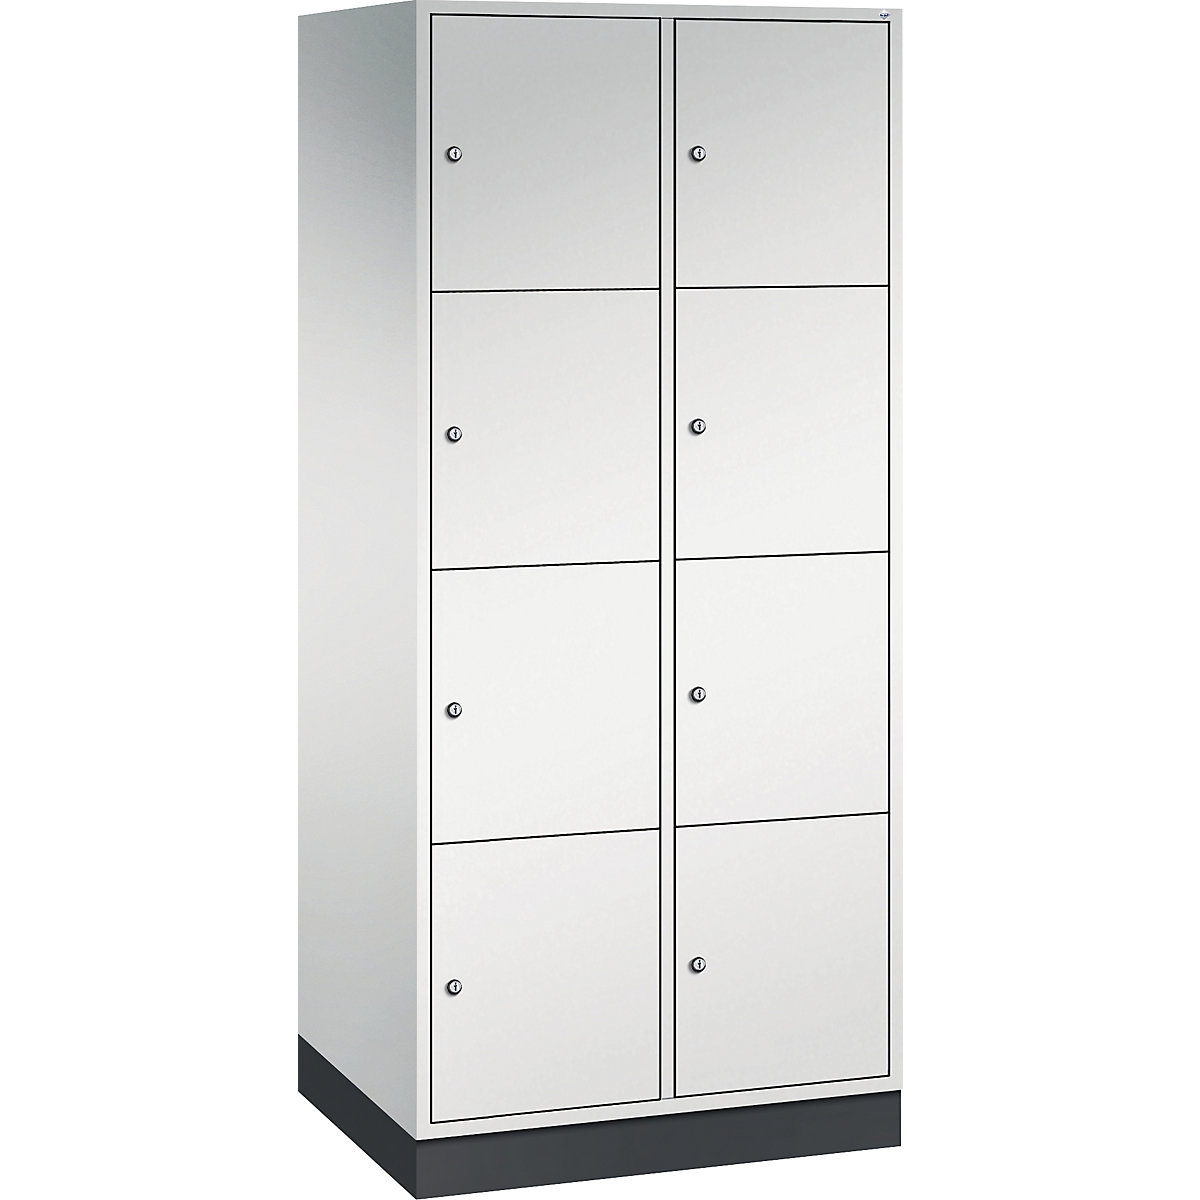 INTRO steel compartment locker, compartment height 435 mm – C+P, WxD 820 x 600 mm, 8 compartments, light grey body, light grey doors